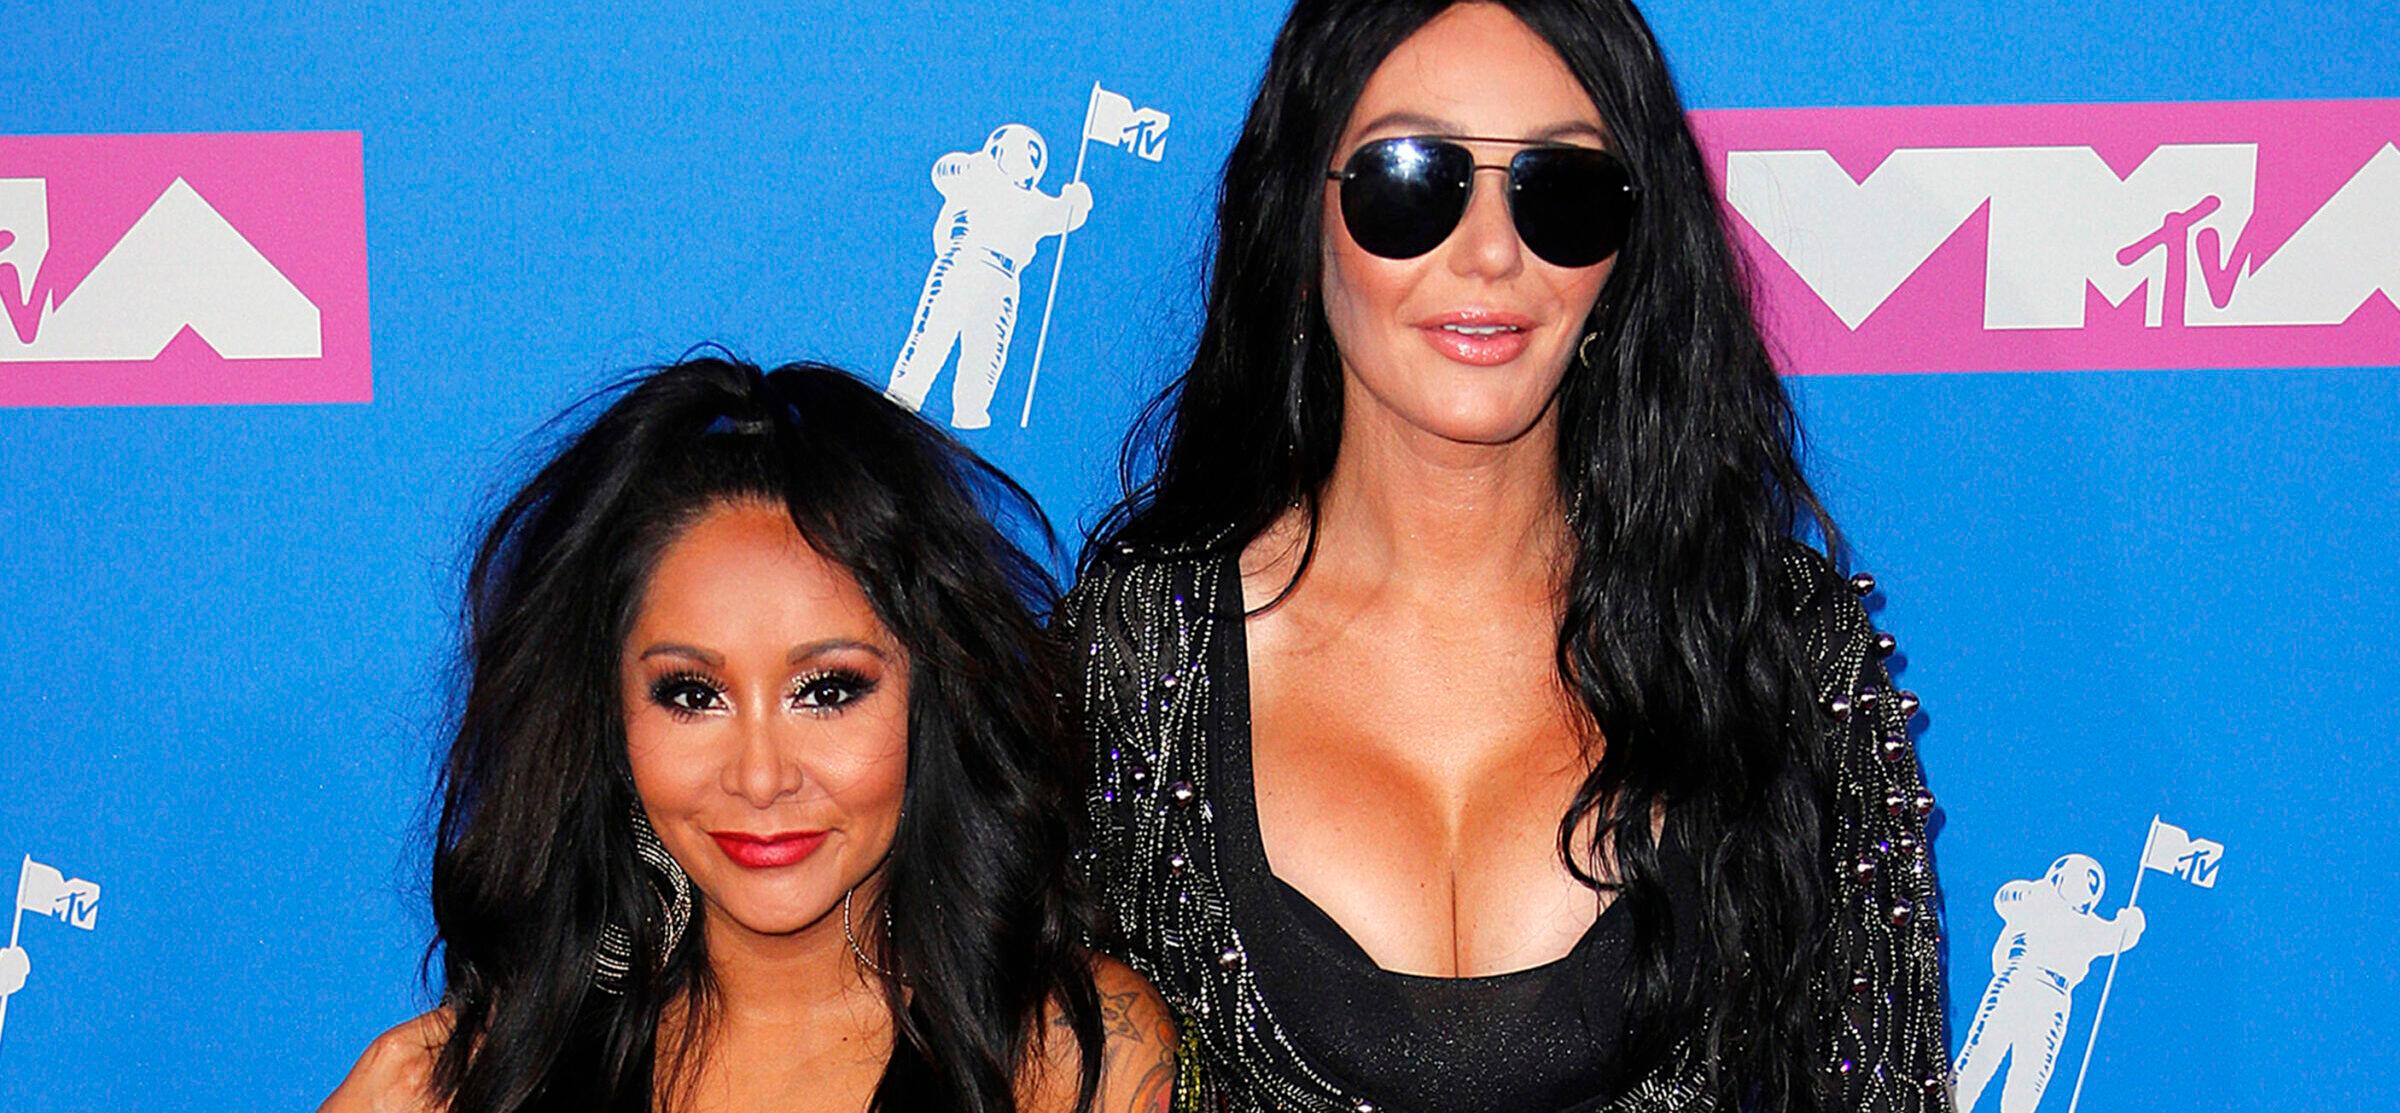 Here’s Why Snooki & JWOWW Weren’t At ‘DWTS’ To Support Vinny Guadagnino